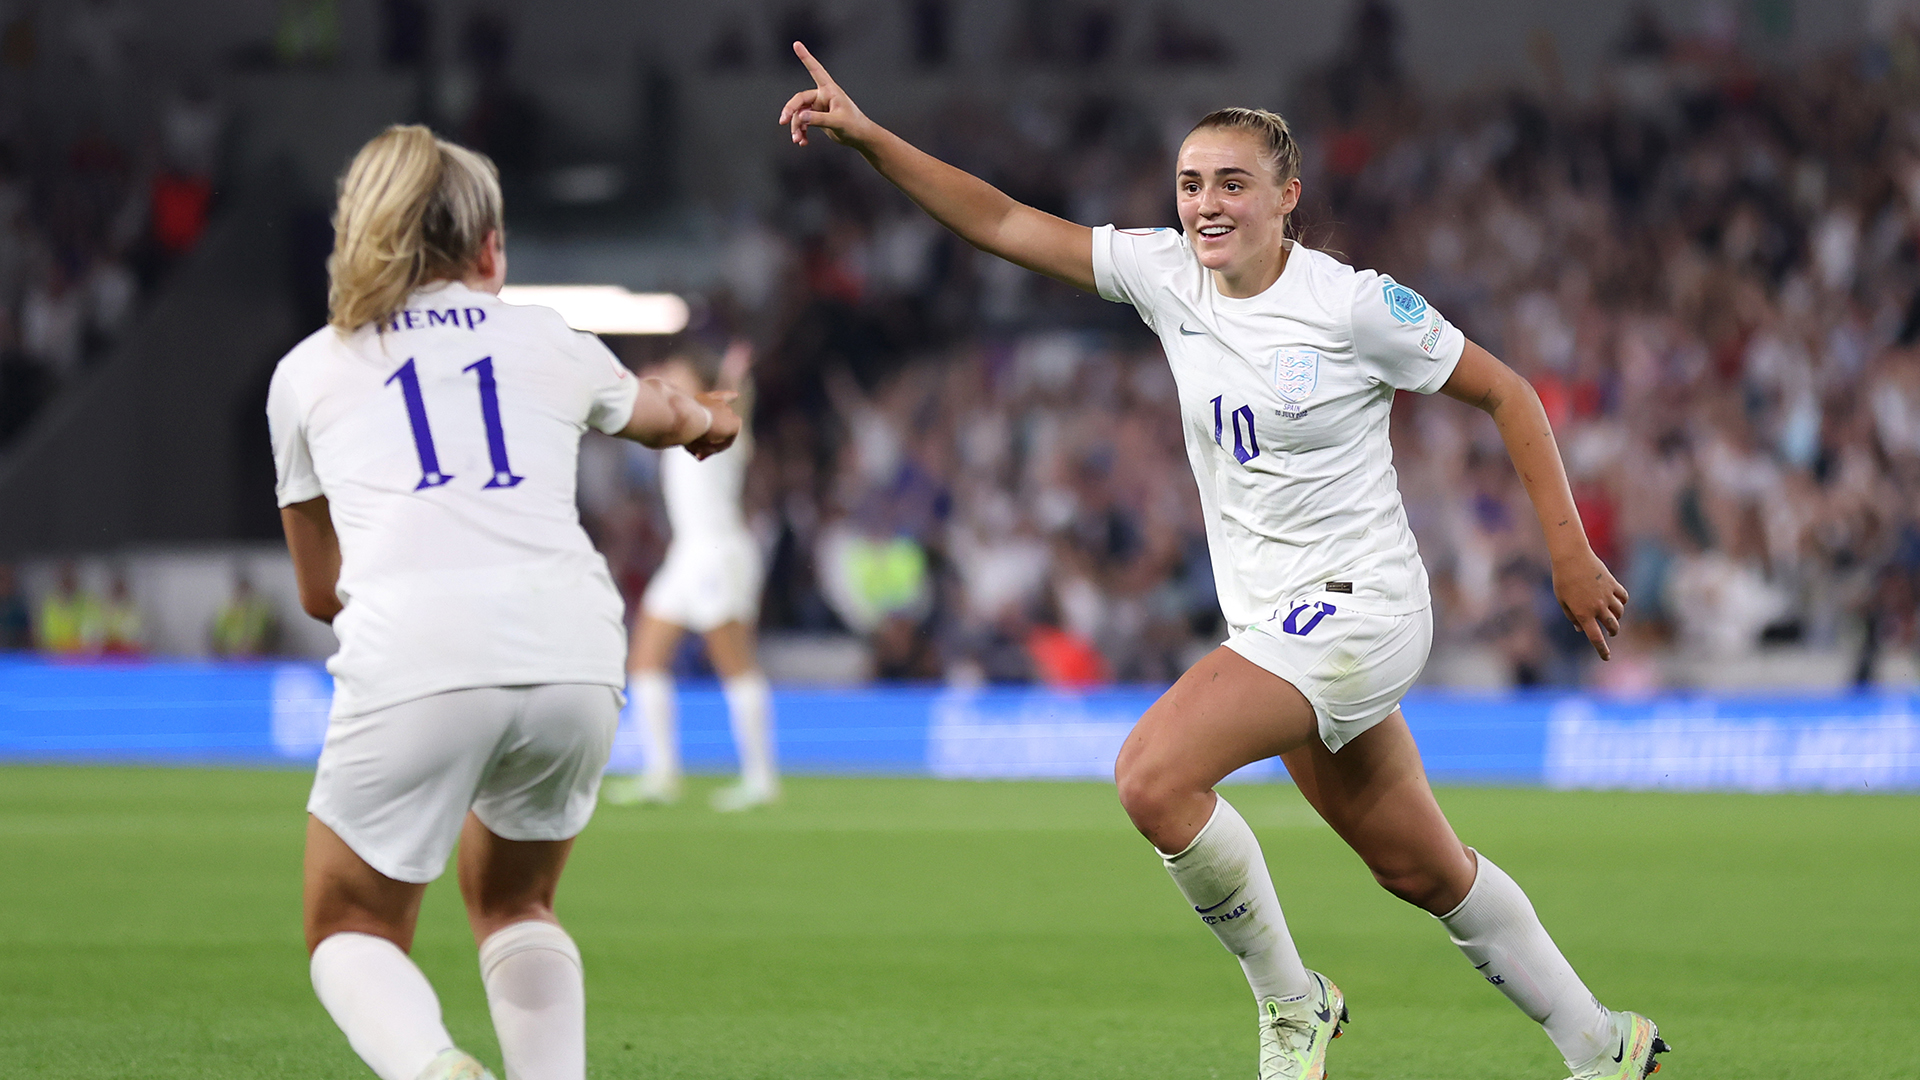 Georgia Stanway of England celebrates after scoring their team's second goal during the UEFA Women's Euro 2022 Quarter Final match between England and Spain at Brighton &amp; Hove Community Stadium on July 20, 2022 in Brighton, England.